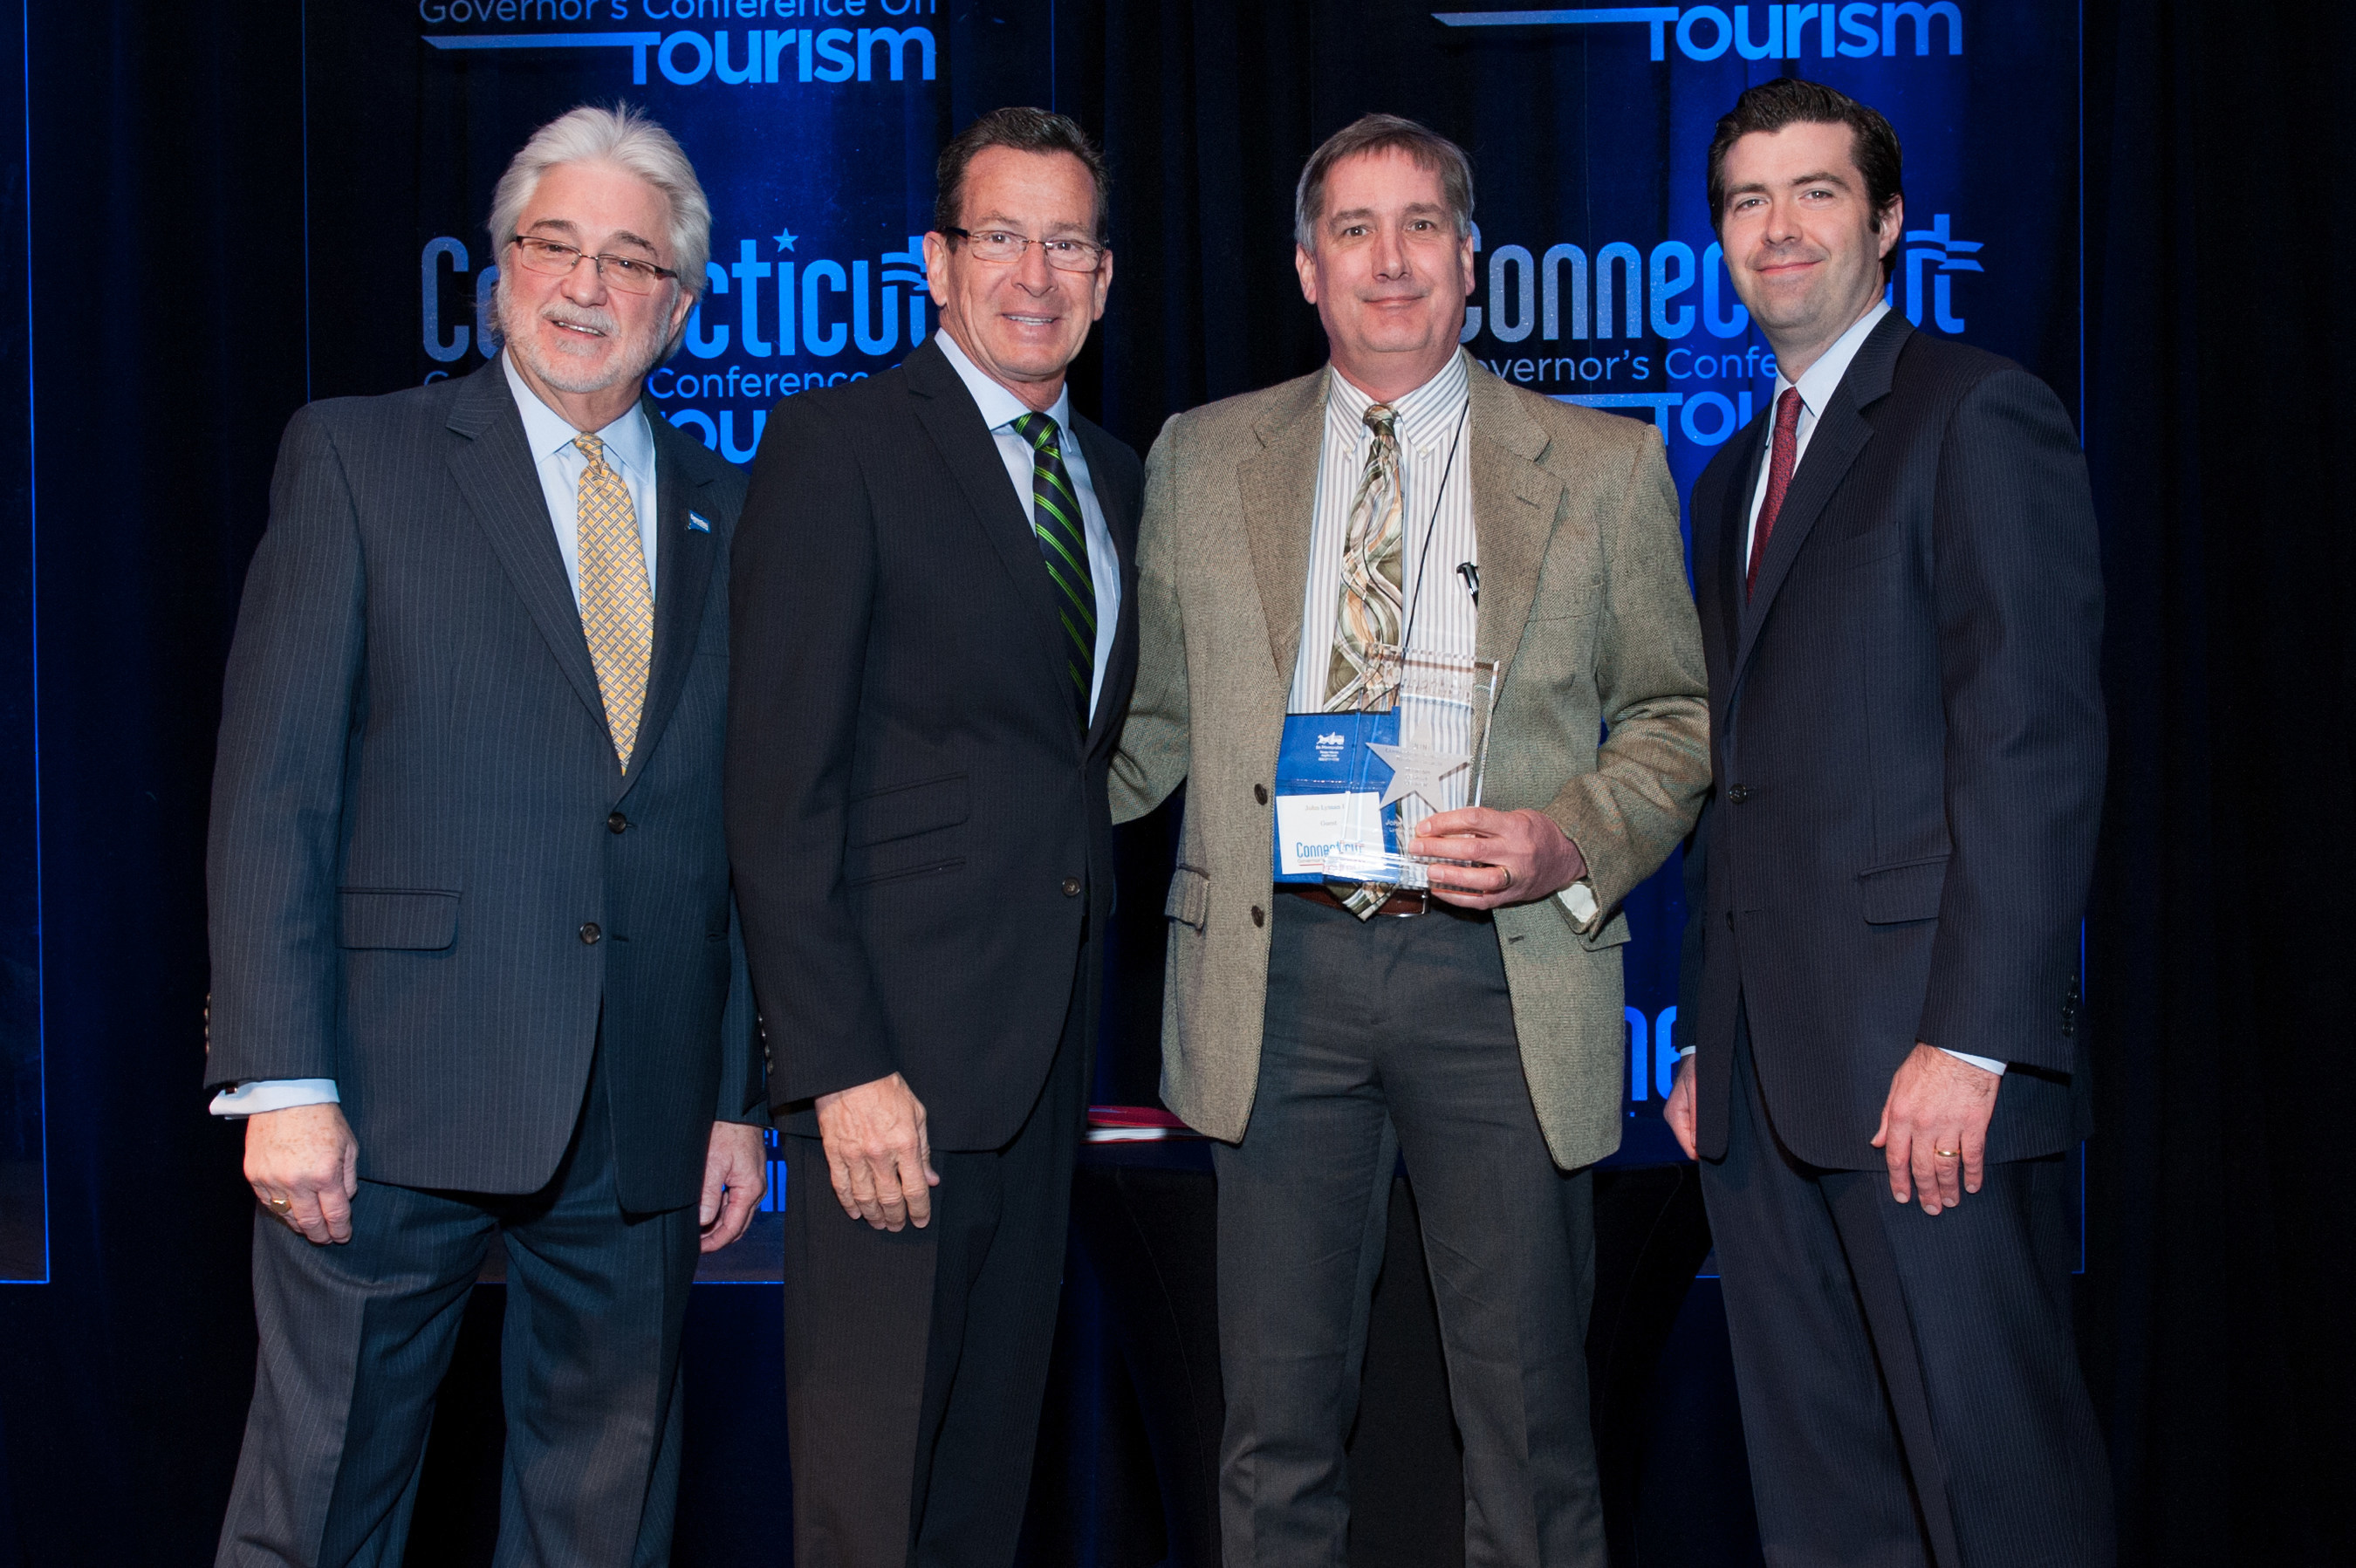 John Lyman III, Executive Vice President of Lyman Orchards (Middlefield) receives the 2016 Connecticut Governor's Tourism Award for Tourism Legacy Leader. From left: Randy Fiveash, Director, Connecticut Office of Tourism; Governor Dannel P. Malloy; John Lyman III, Executive Vice President, Lyman Orchards; Tim Sullivan, Deputy Commissioner, Connecticut Department of Economic and Community Development.